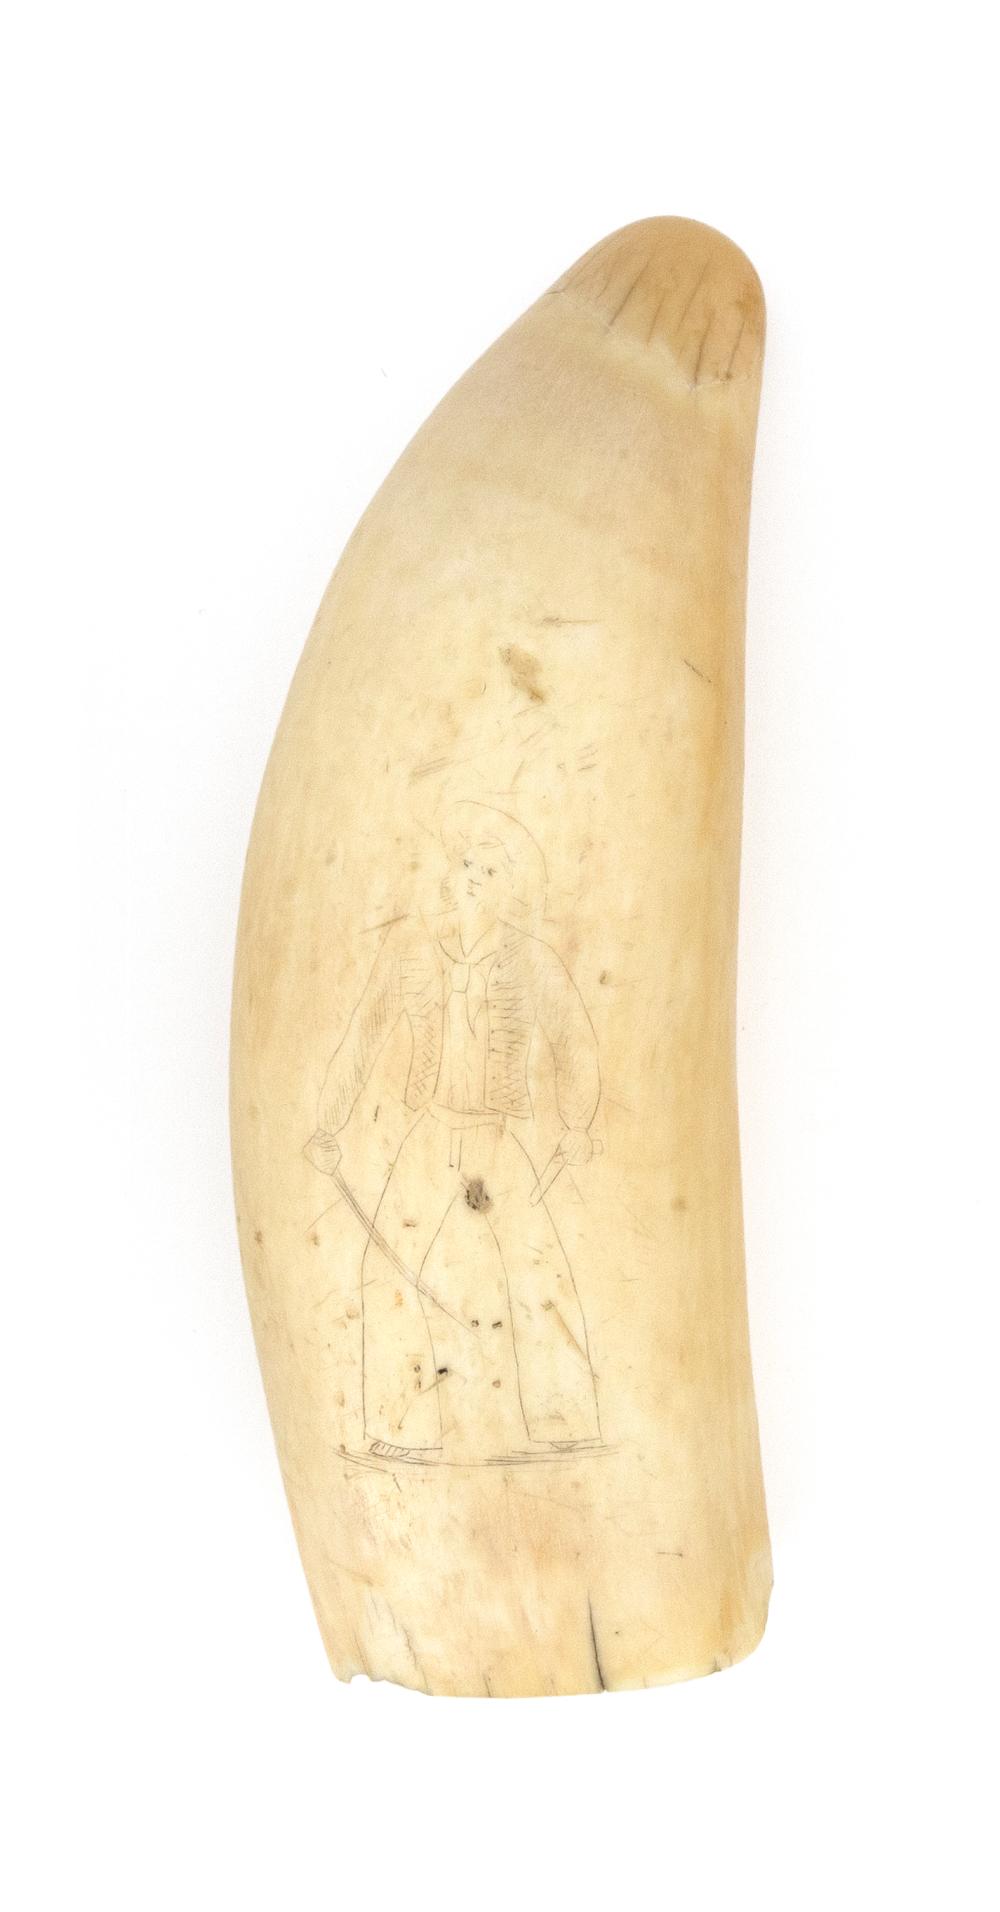 SCRIMSHAW WHALE'S TOOTH DEPICTING